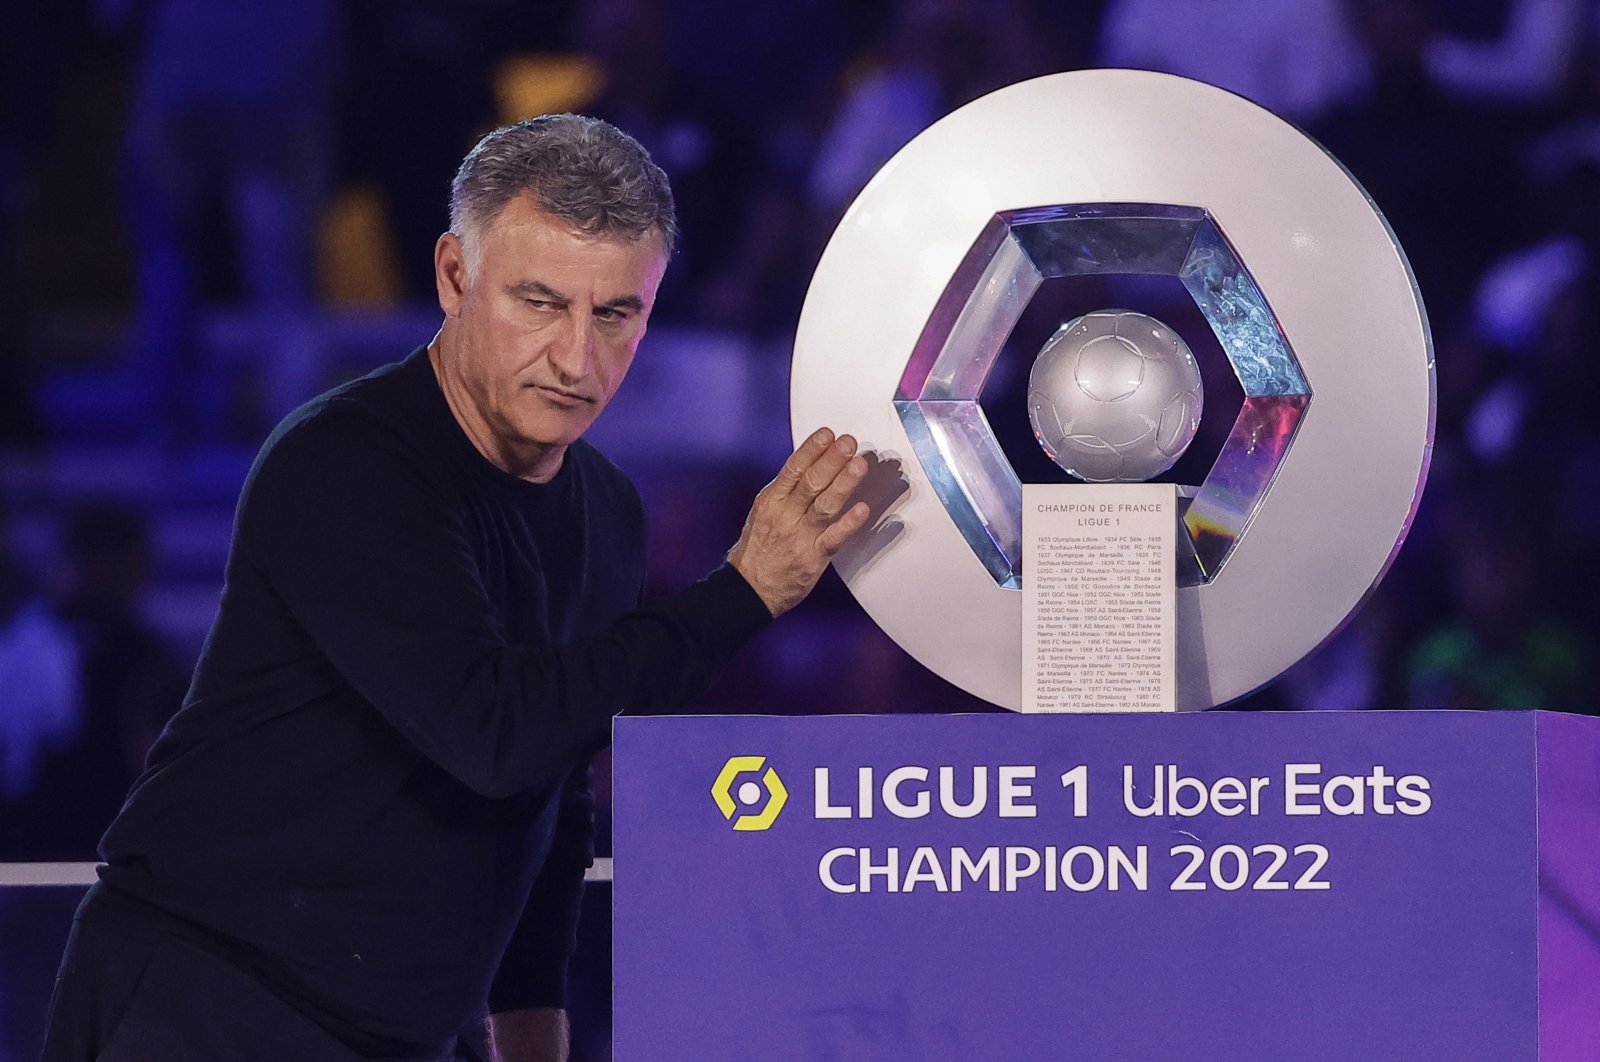 Paris Saint-Germain head coach Christophe Galtier poses with the French Ligue 1 trophy that the club won, during a ceremony following the French Ligue 1 match between Paris Saint-Germain and Clermont Foot 63, Paris, France, June 3, 2023. (EPA Photo)